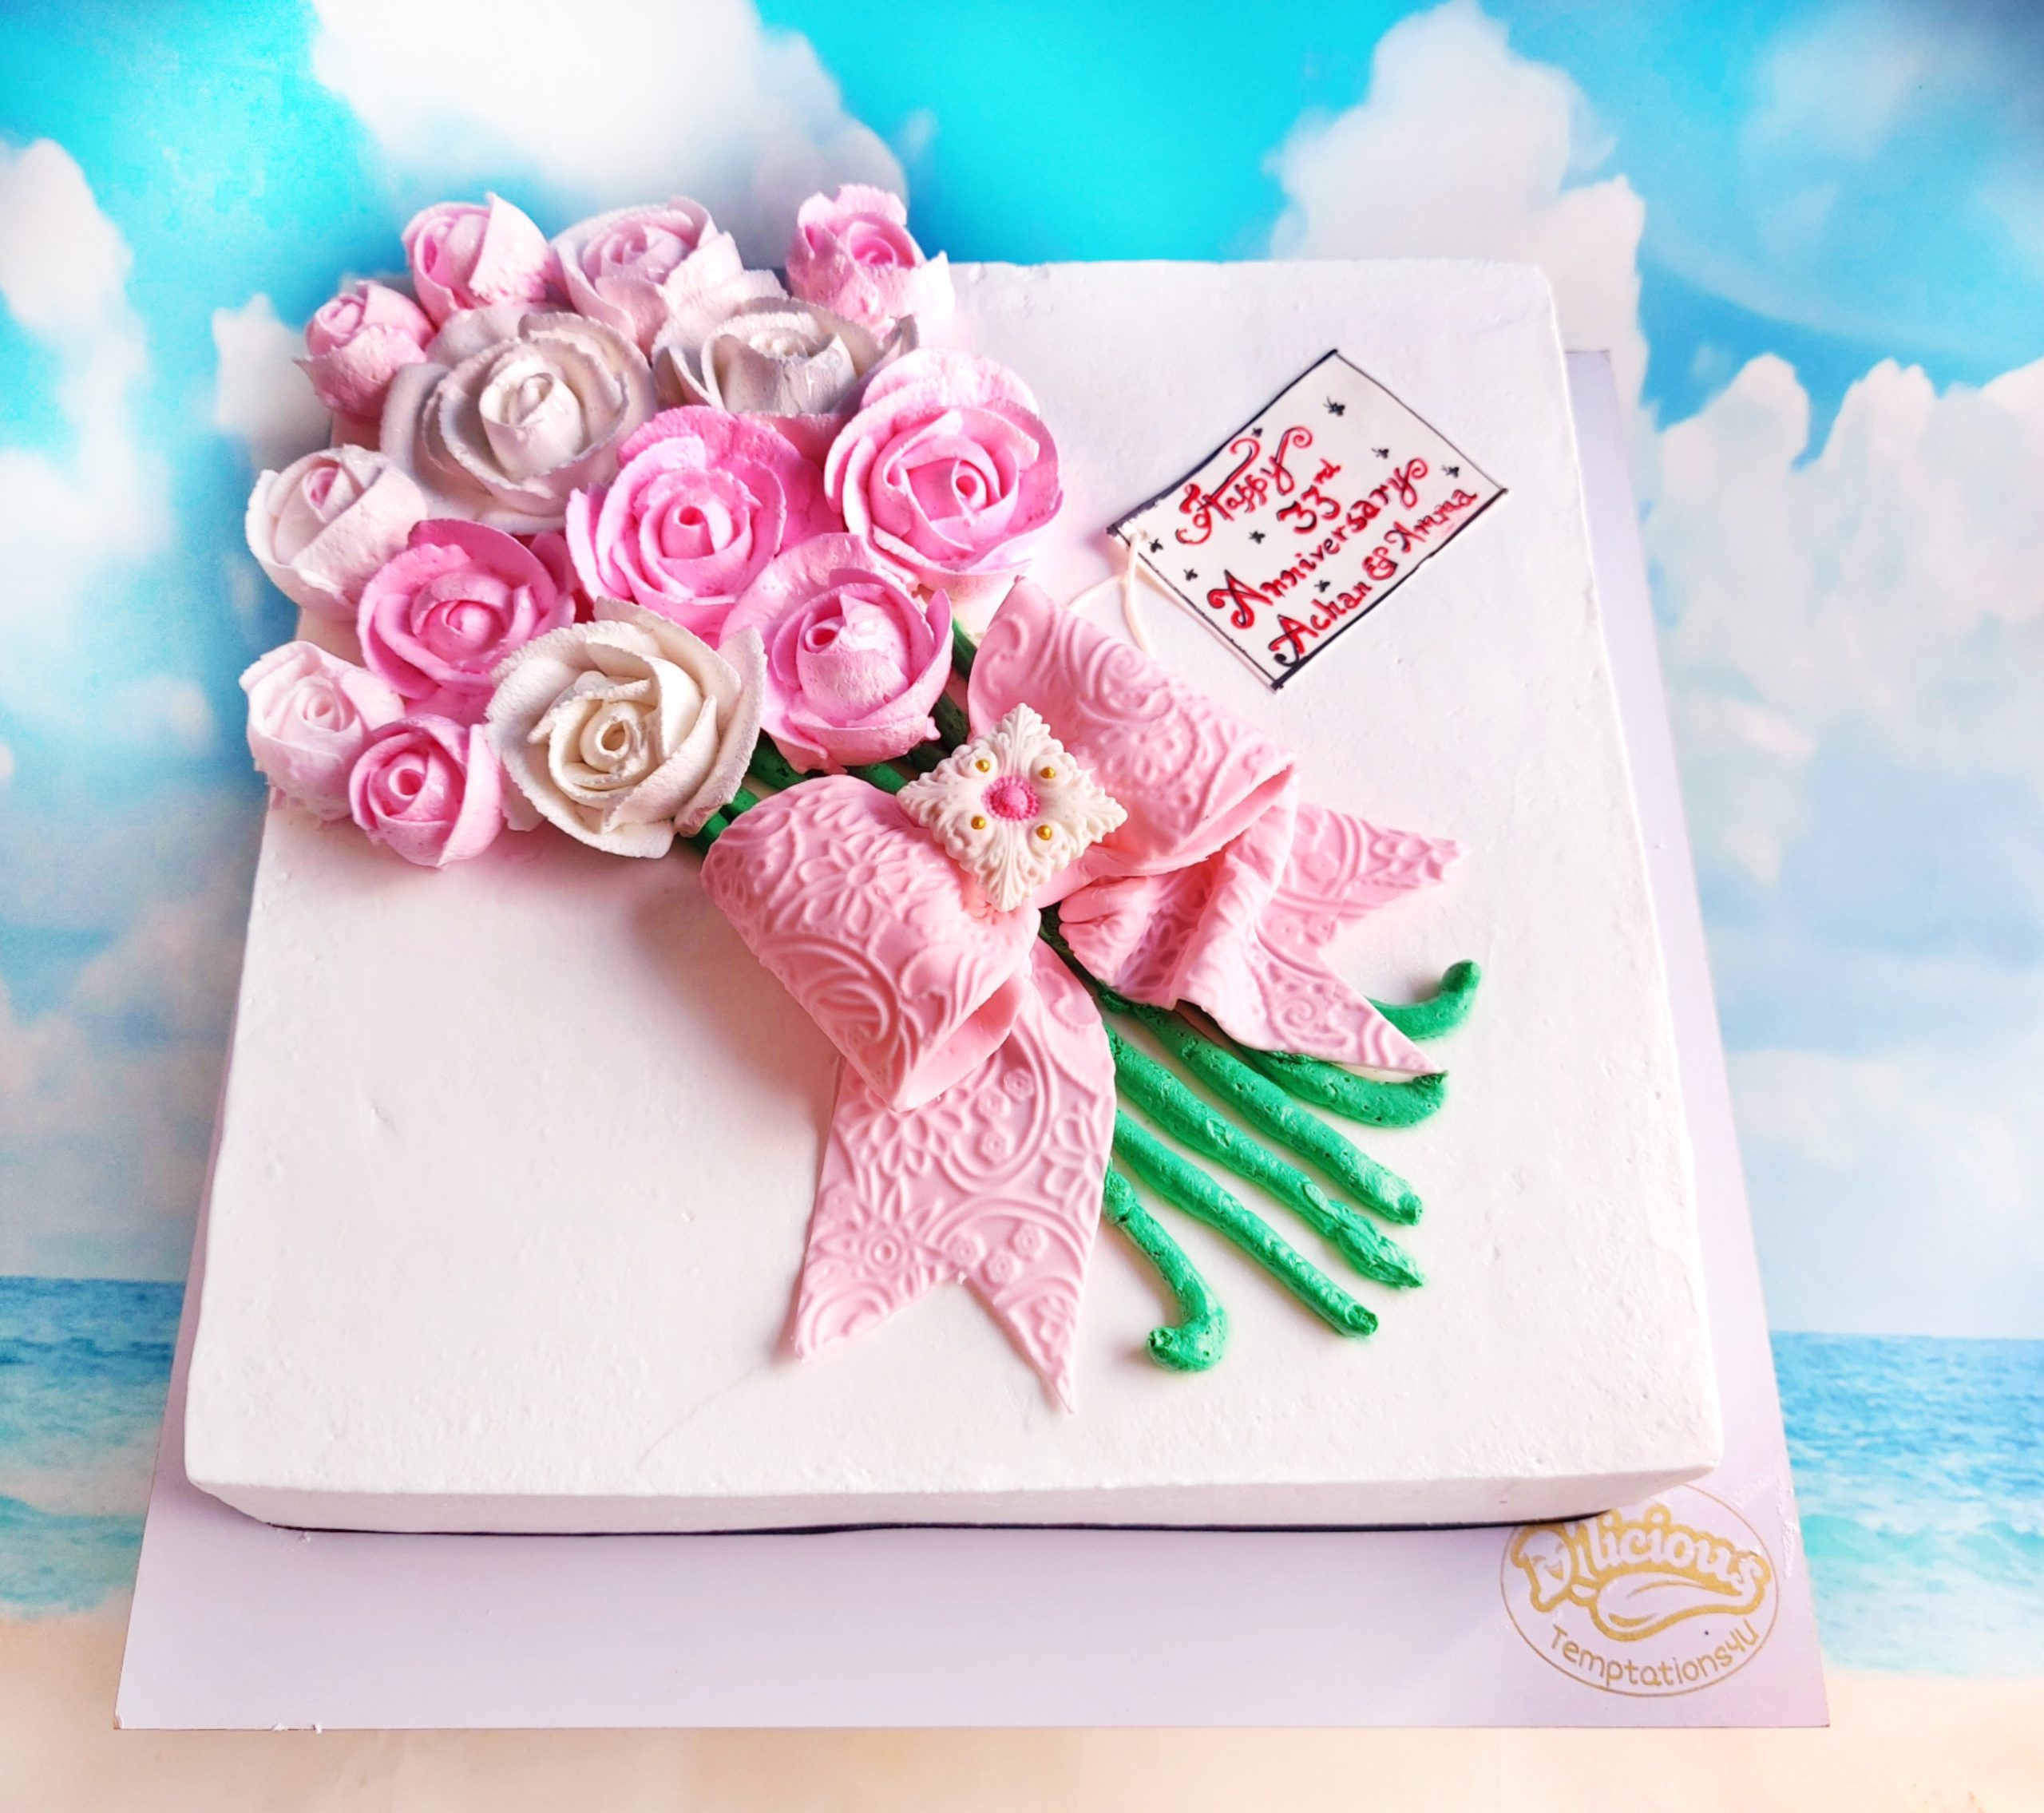 Floral Theme Cake Designs, Images, Price Near Me